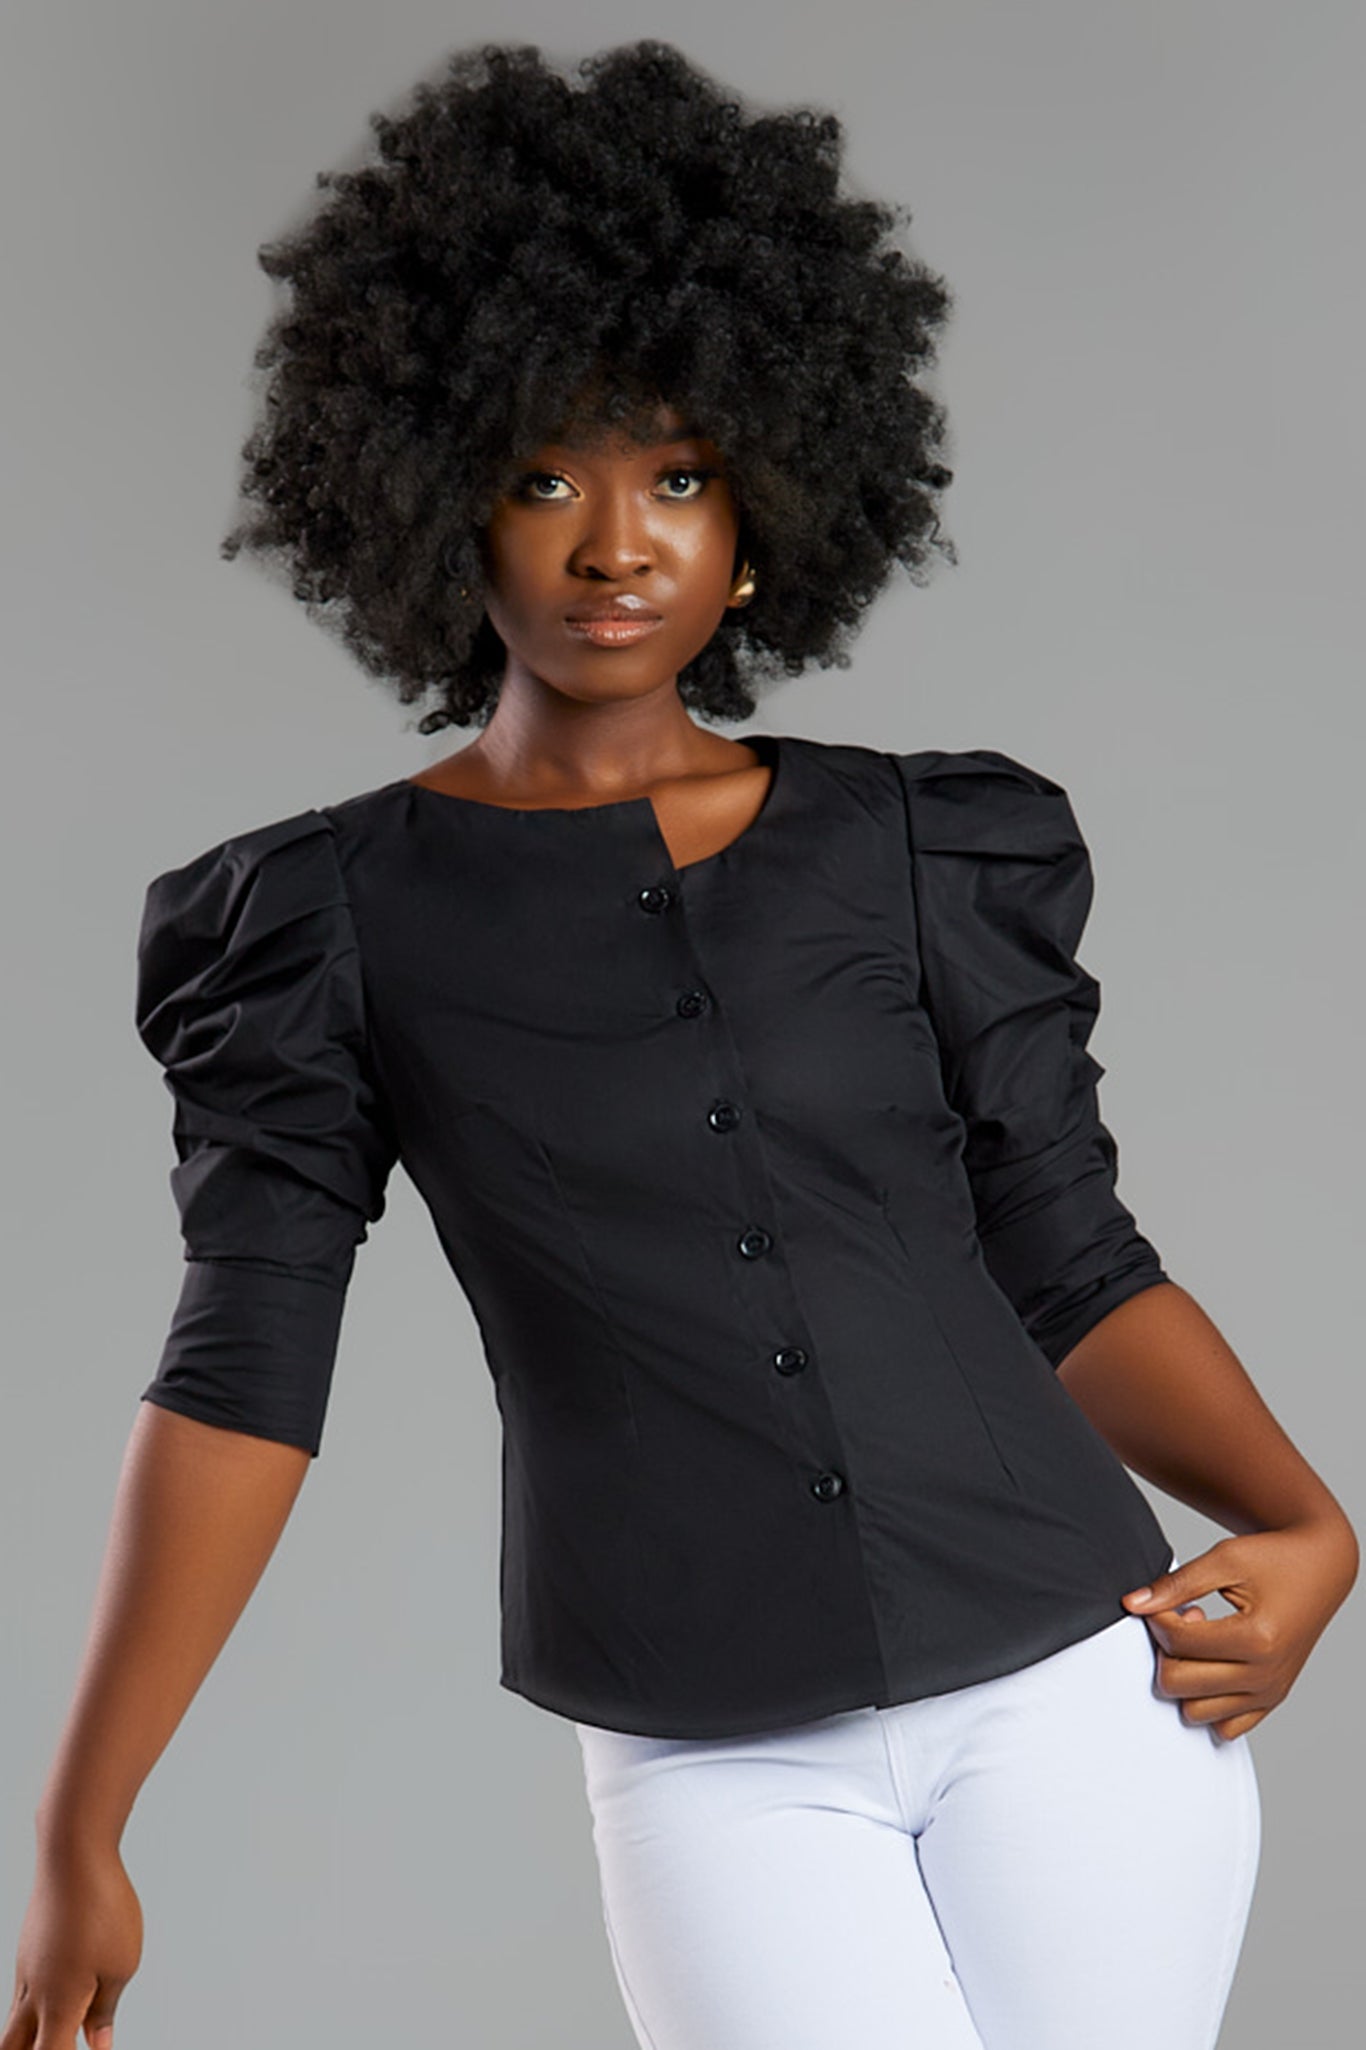 Seragyi's Martina Blouse in Black, made from sustainable cotton. With a modern asymmetrical neckline and ruched sleeves, this elegant design is a must-have in Women's Clothing.